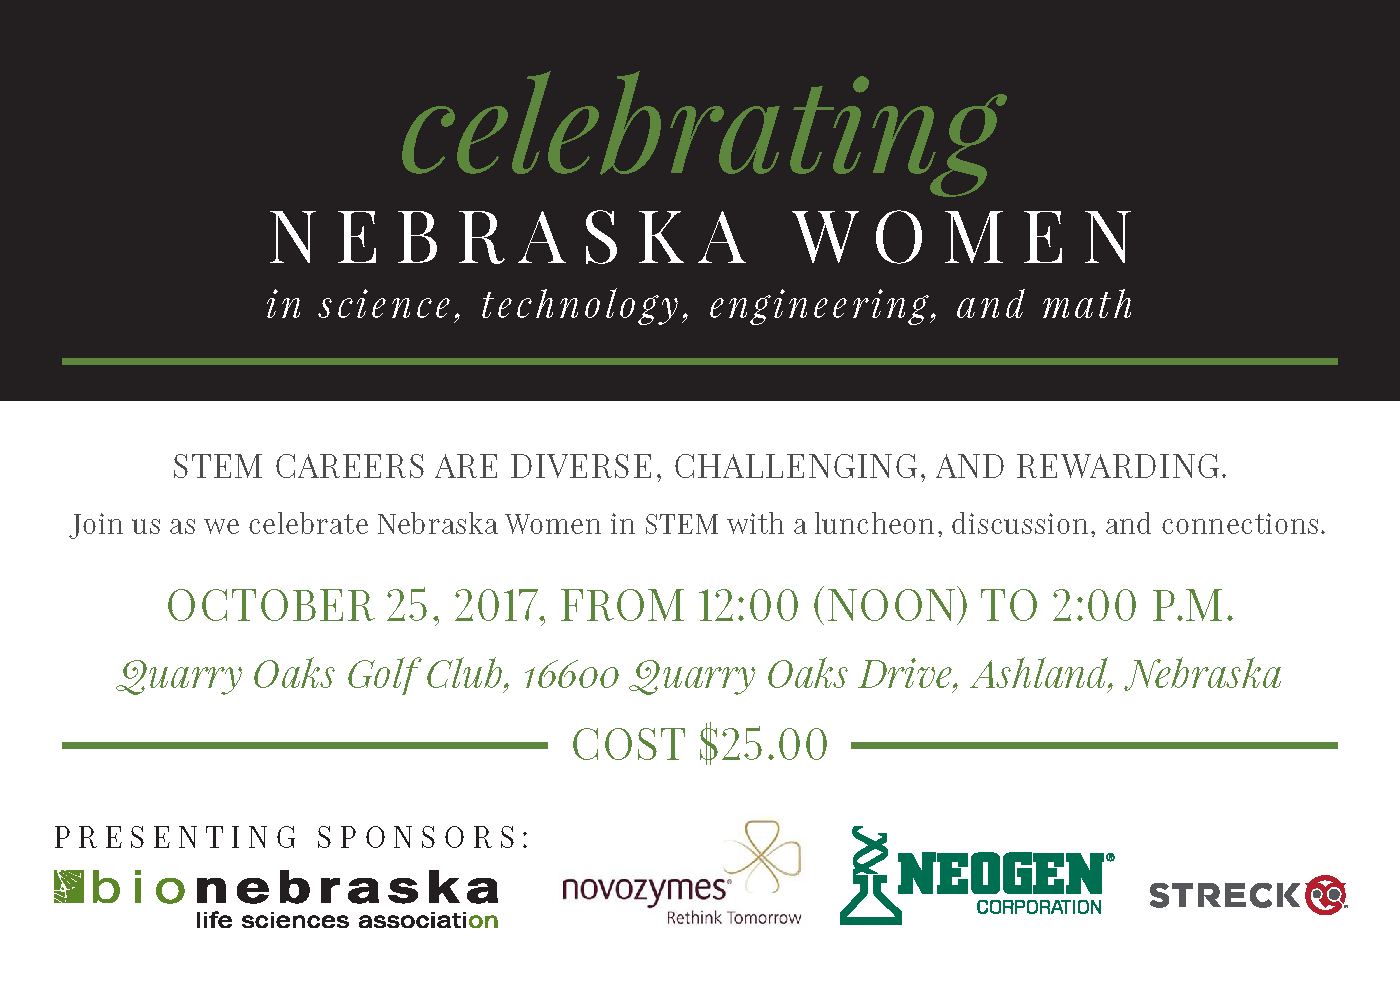 BIO Nebraska is hosting a Women in STEM luncheon and discussion on October 25th in Ashland, NE.